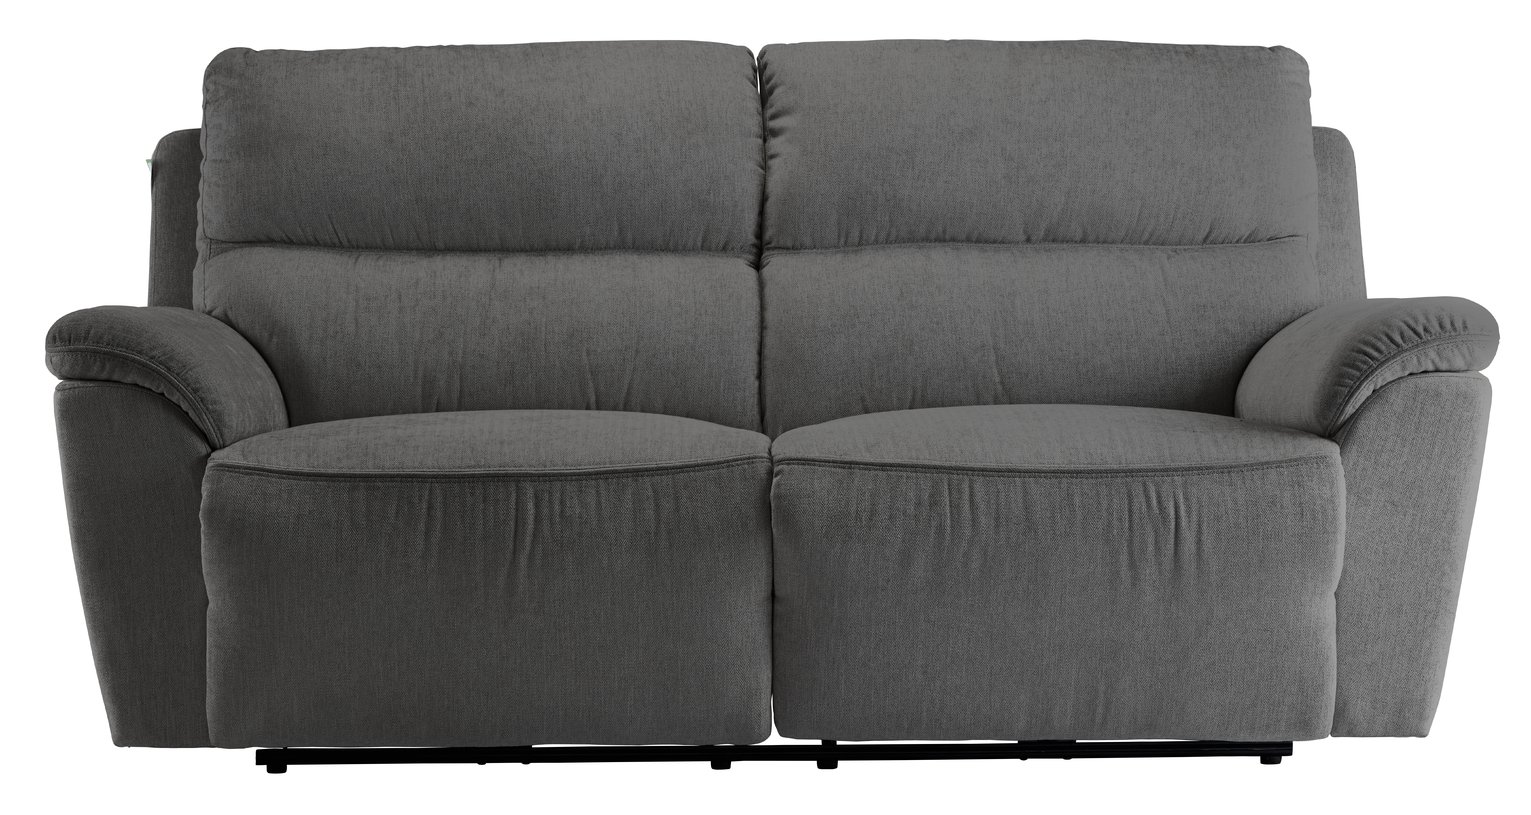 Argos Home Sandy 3 Seater Power Recliner Sofa - Charcoal